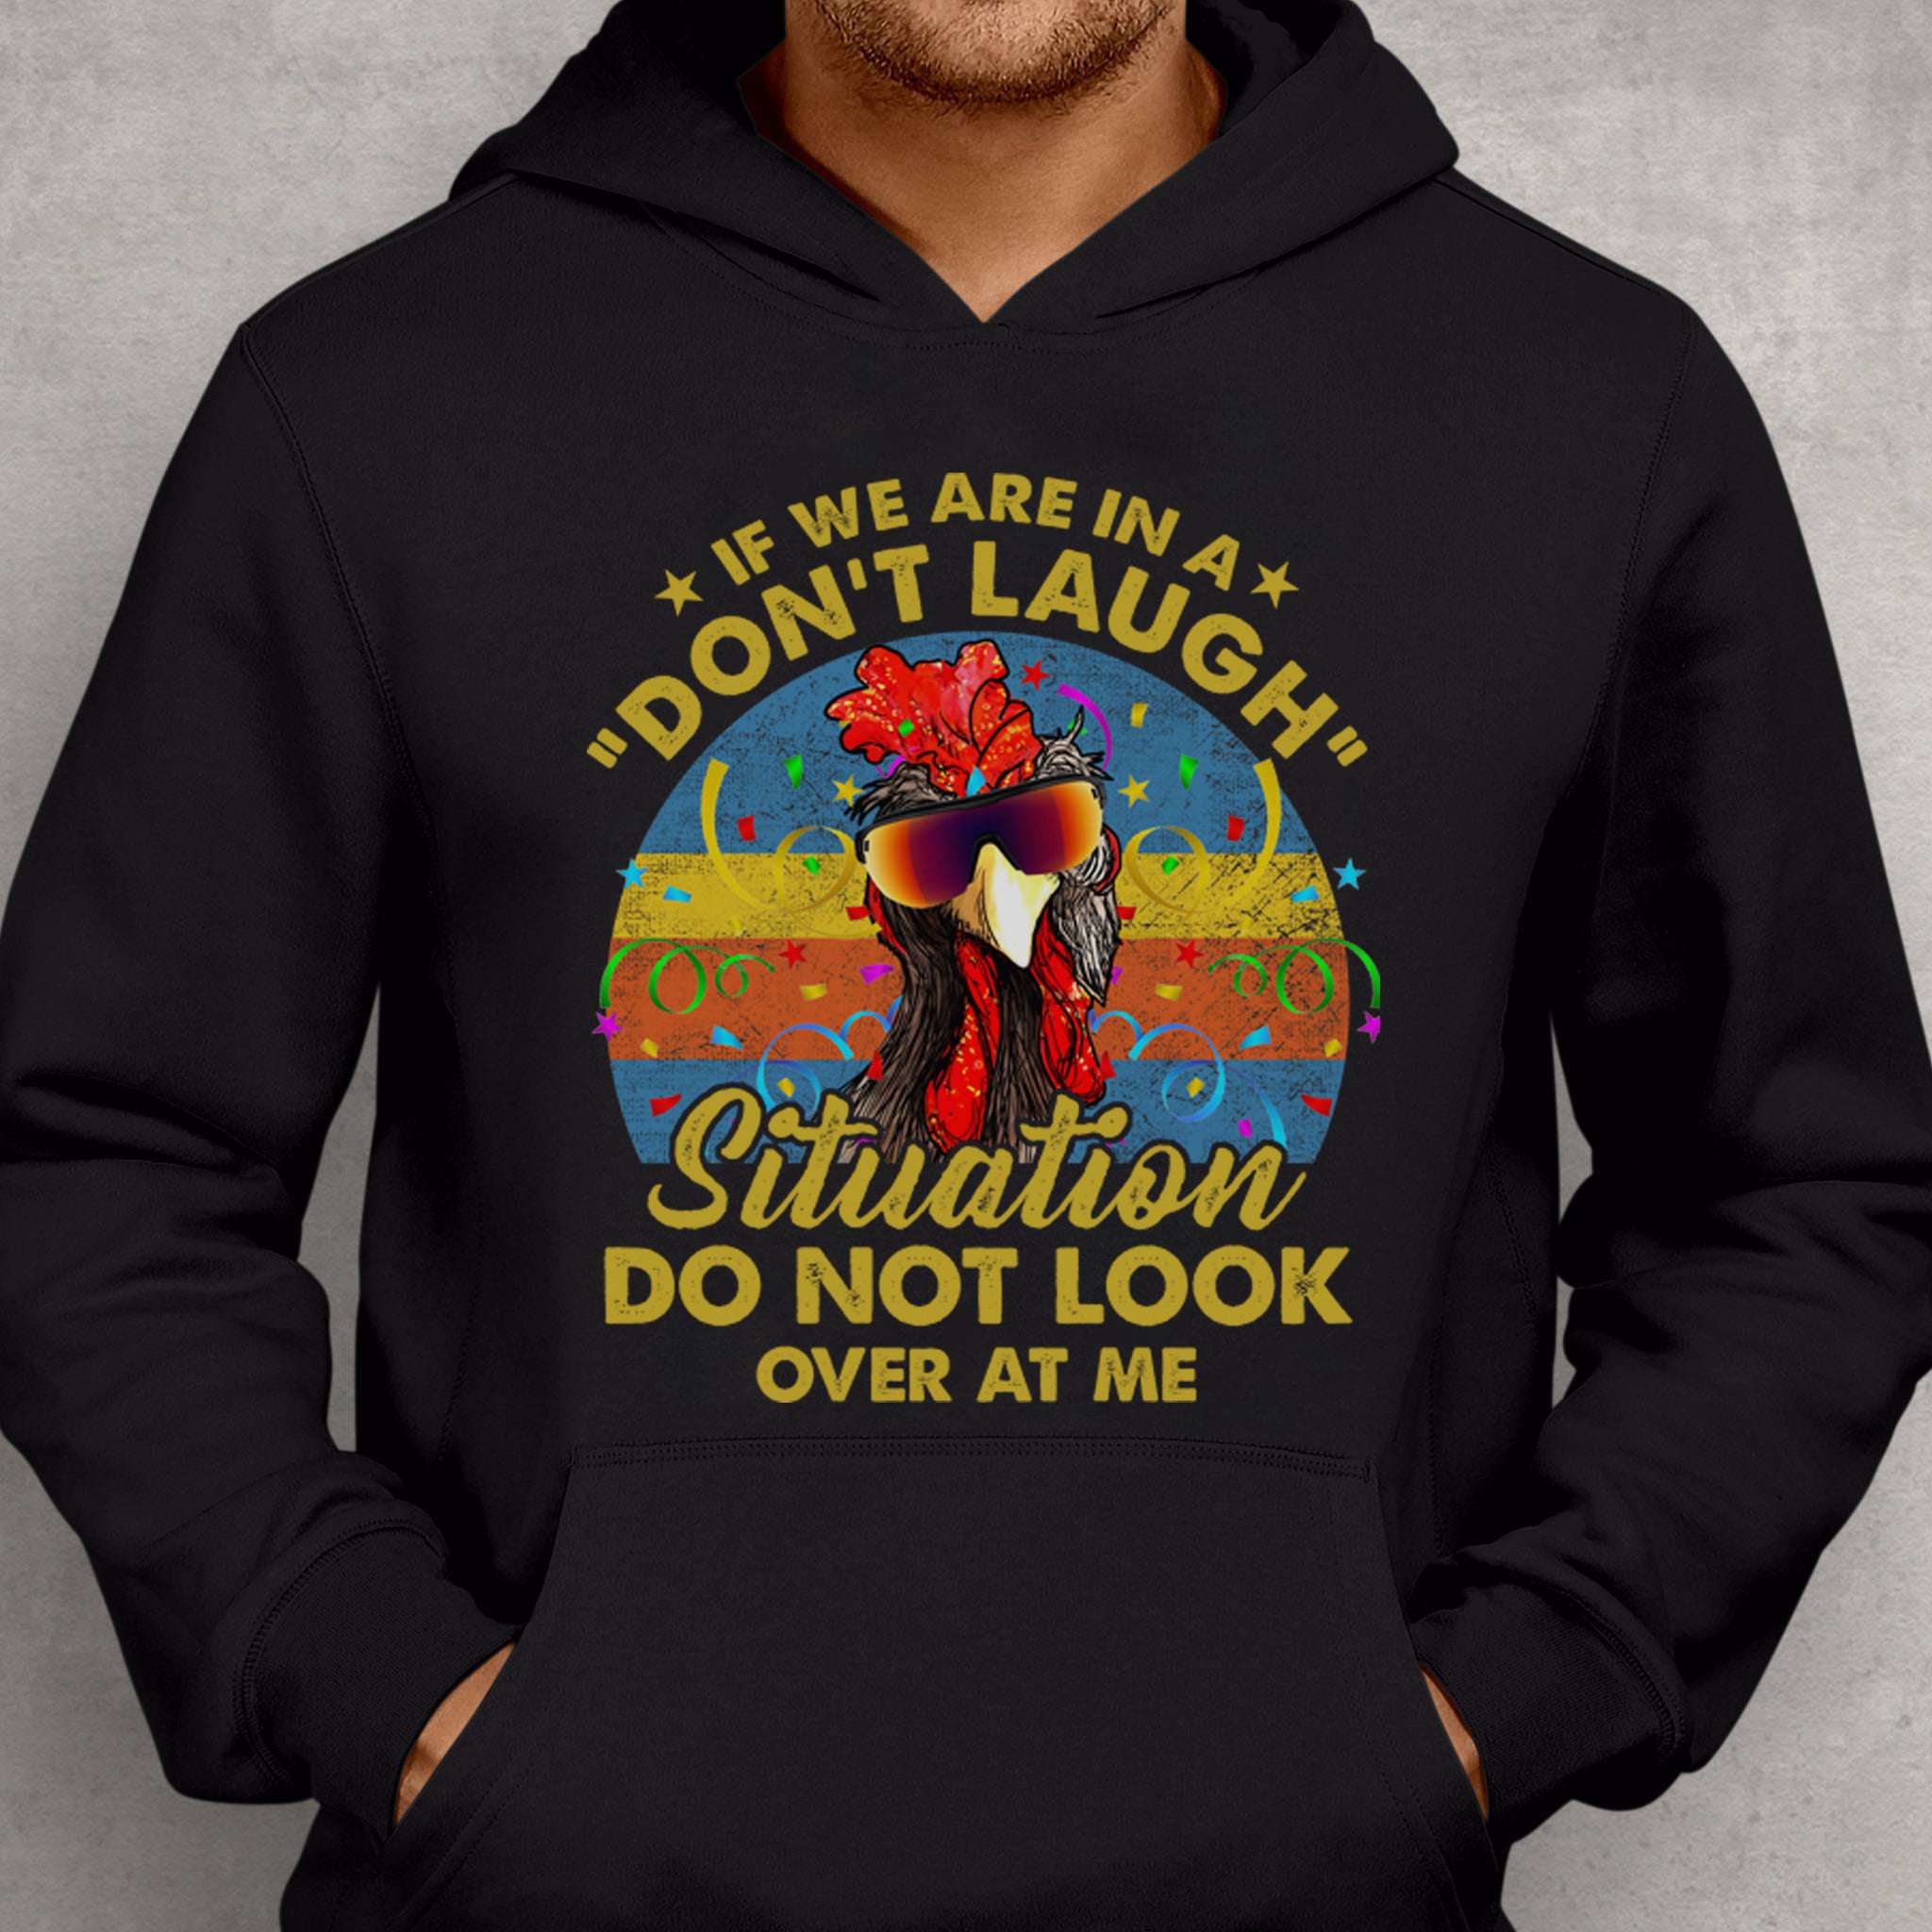 If we are in a don't laugh situation, do not look over at me - Dope chicken graphic T-shirt